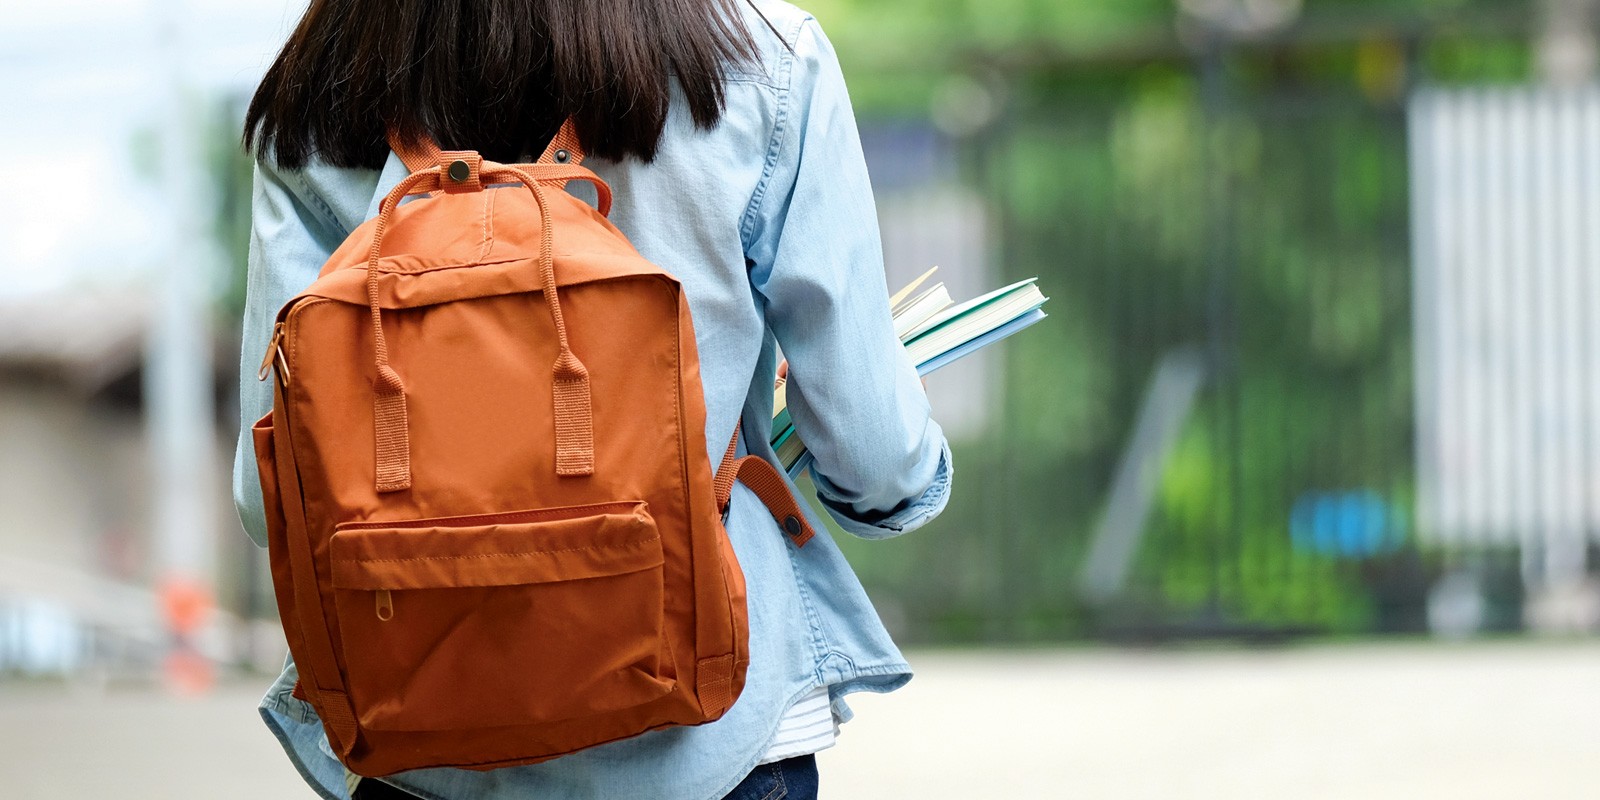 young female youth with backpack and books from behind